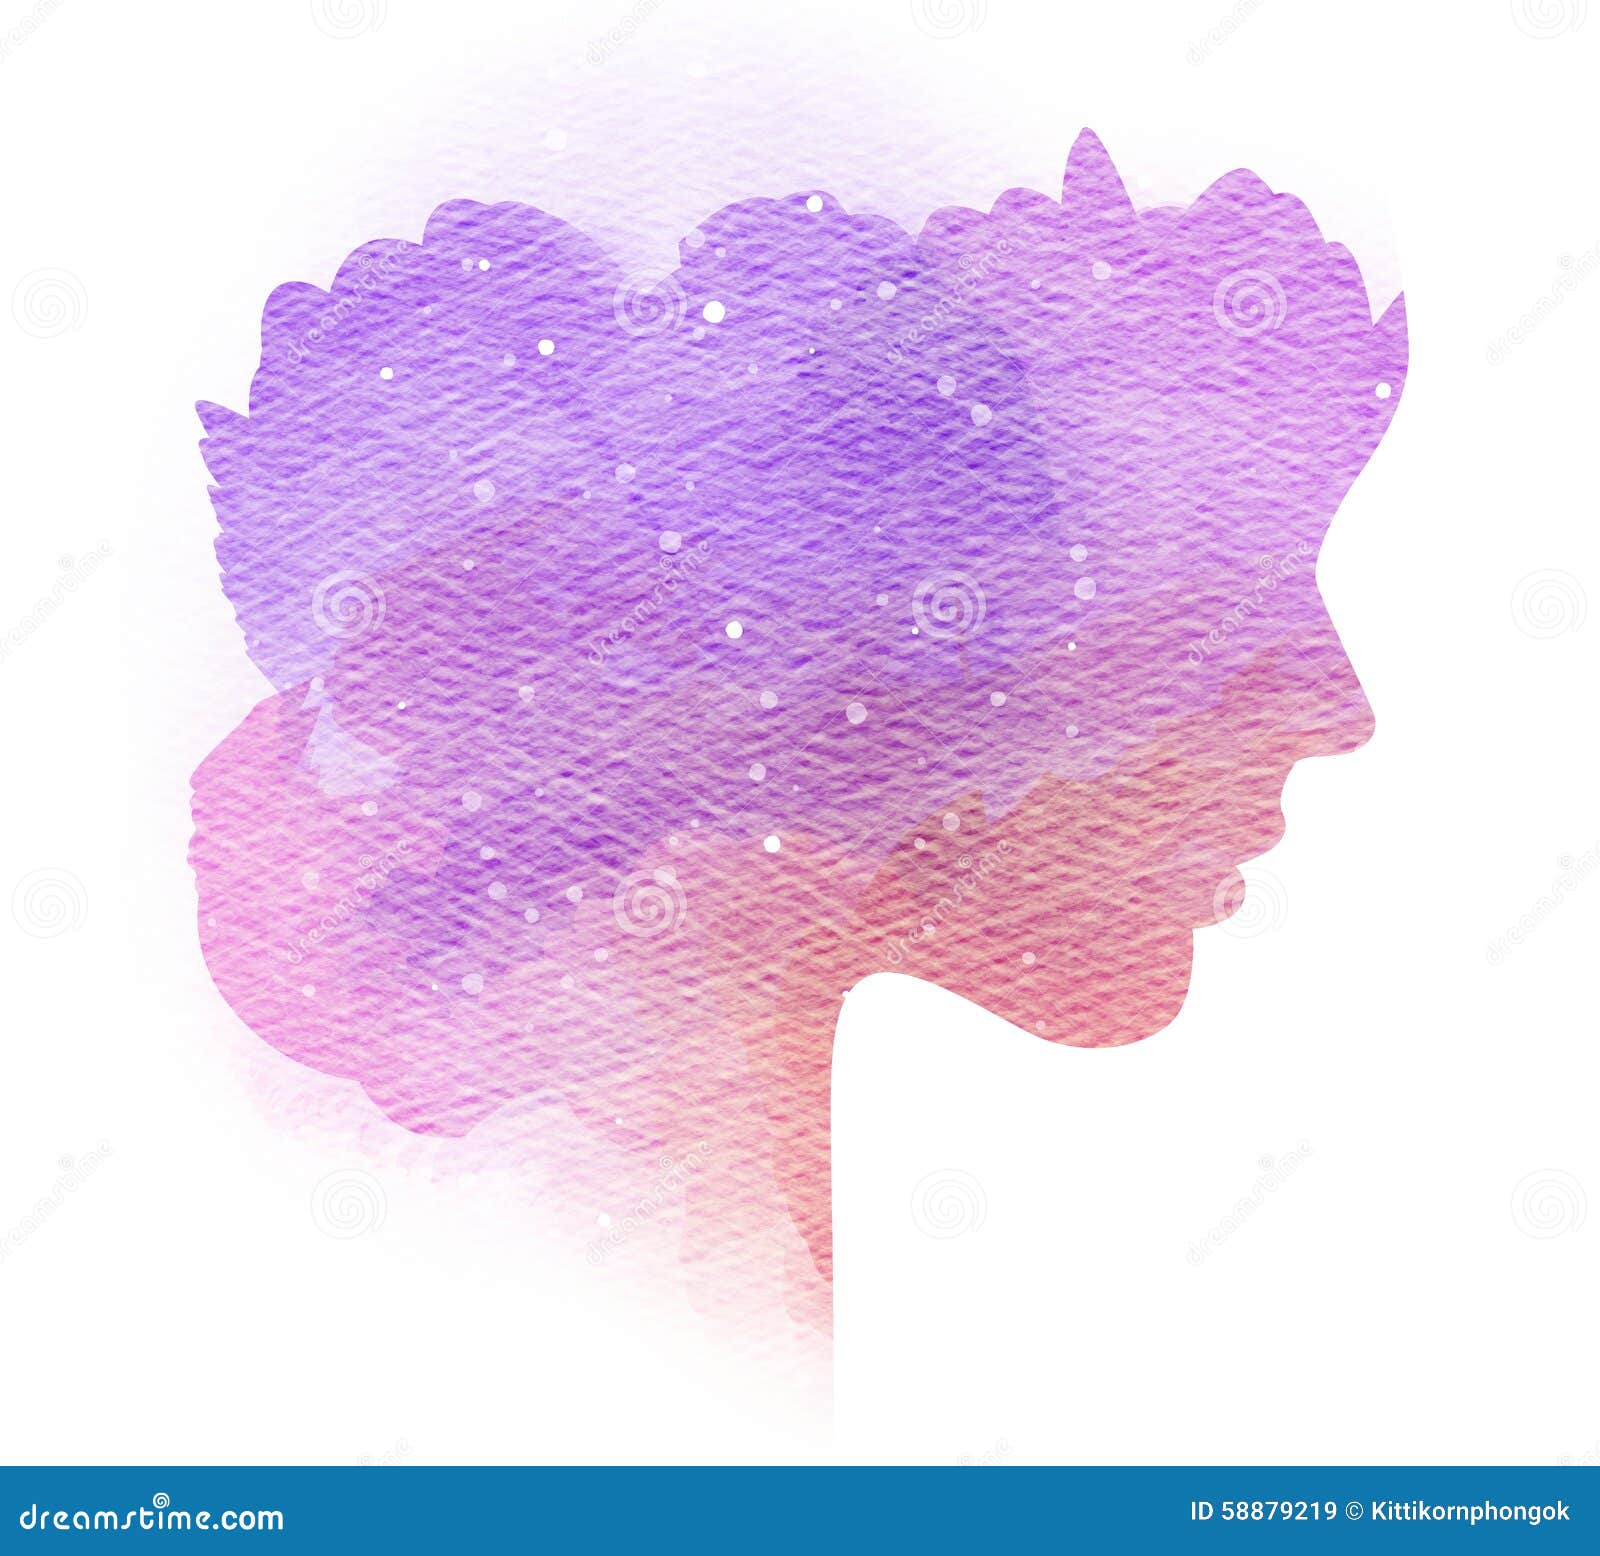 double exposure silhouette of woman with splashed water color.